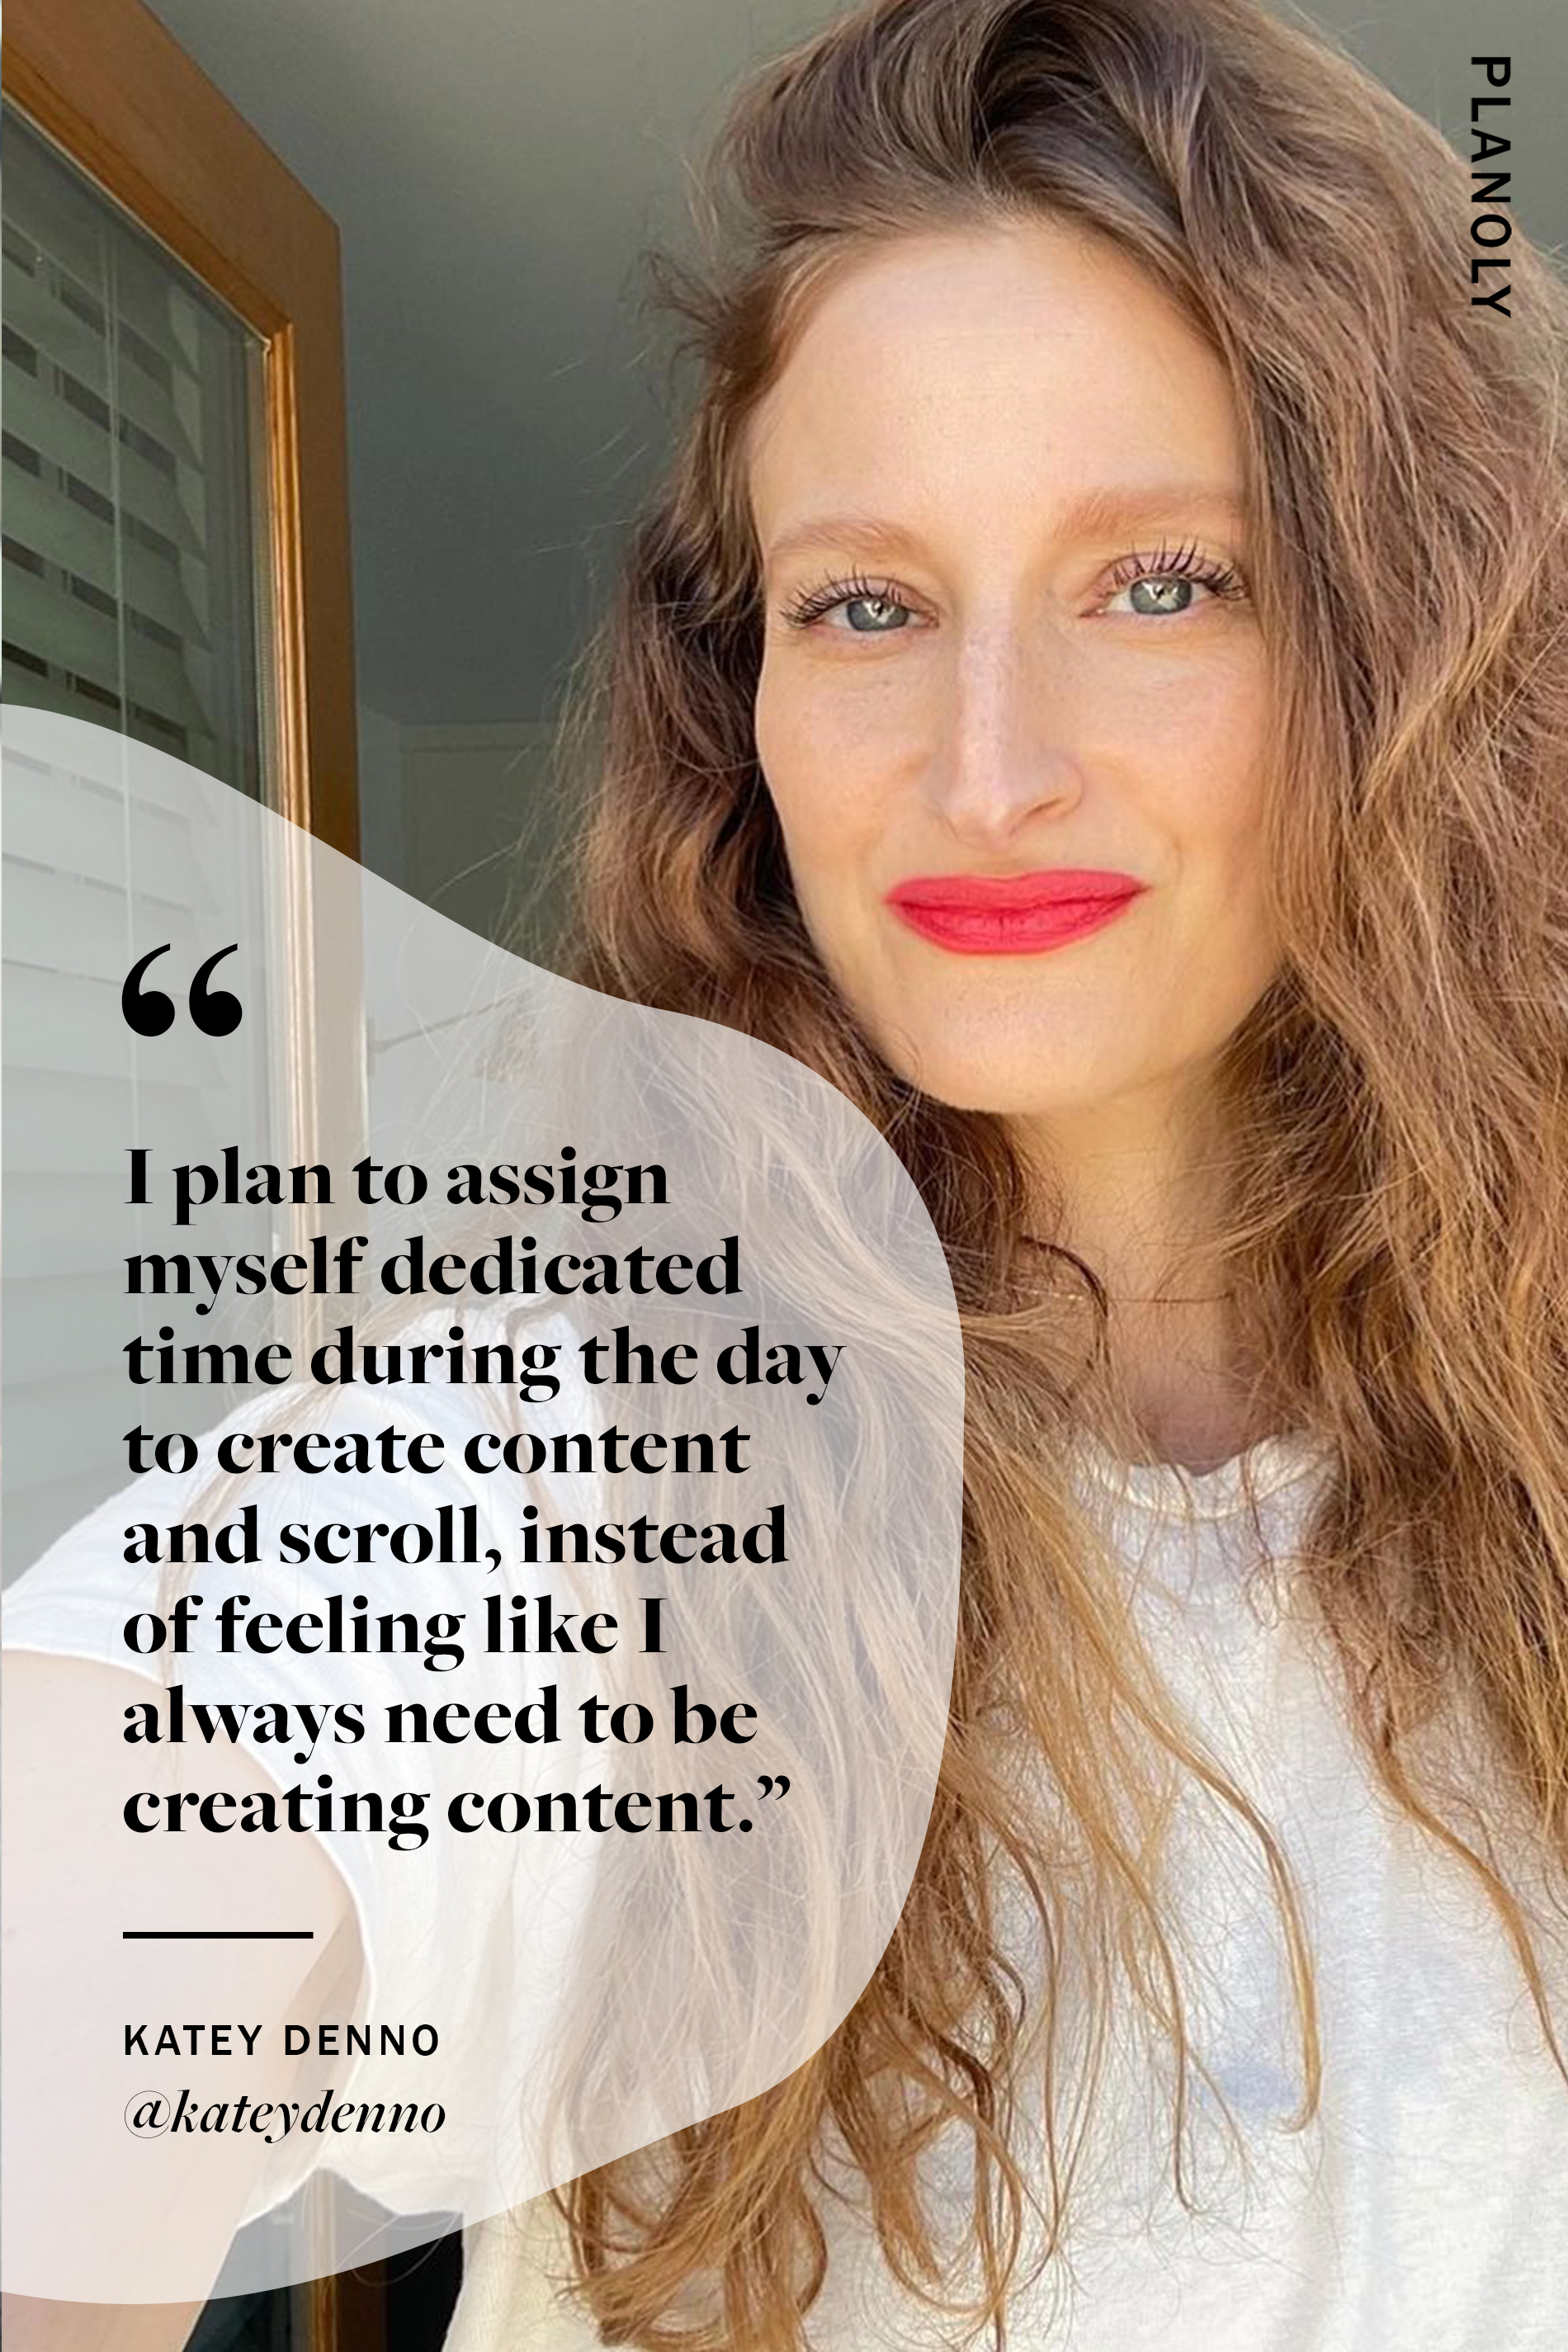 PLANOLY - Blog Post - 5 Influencers Share What They Are Doing Differently in 2021 - Image 2